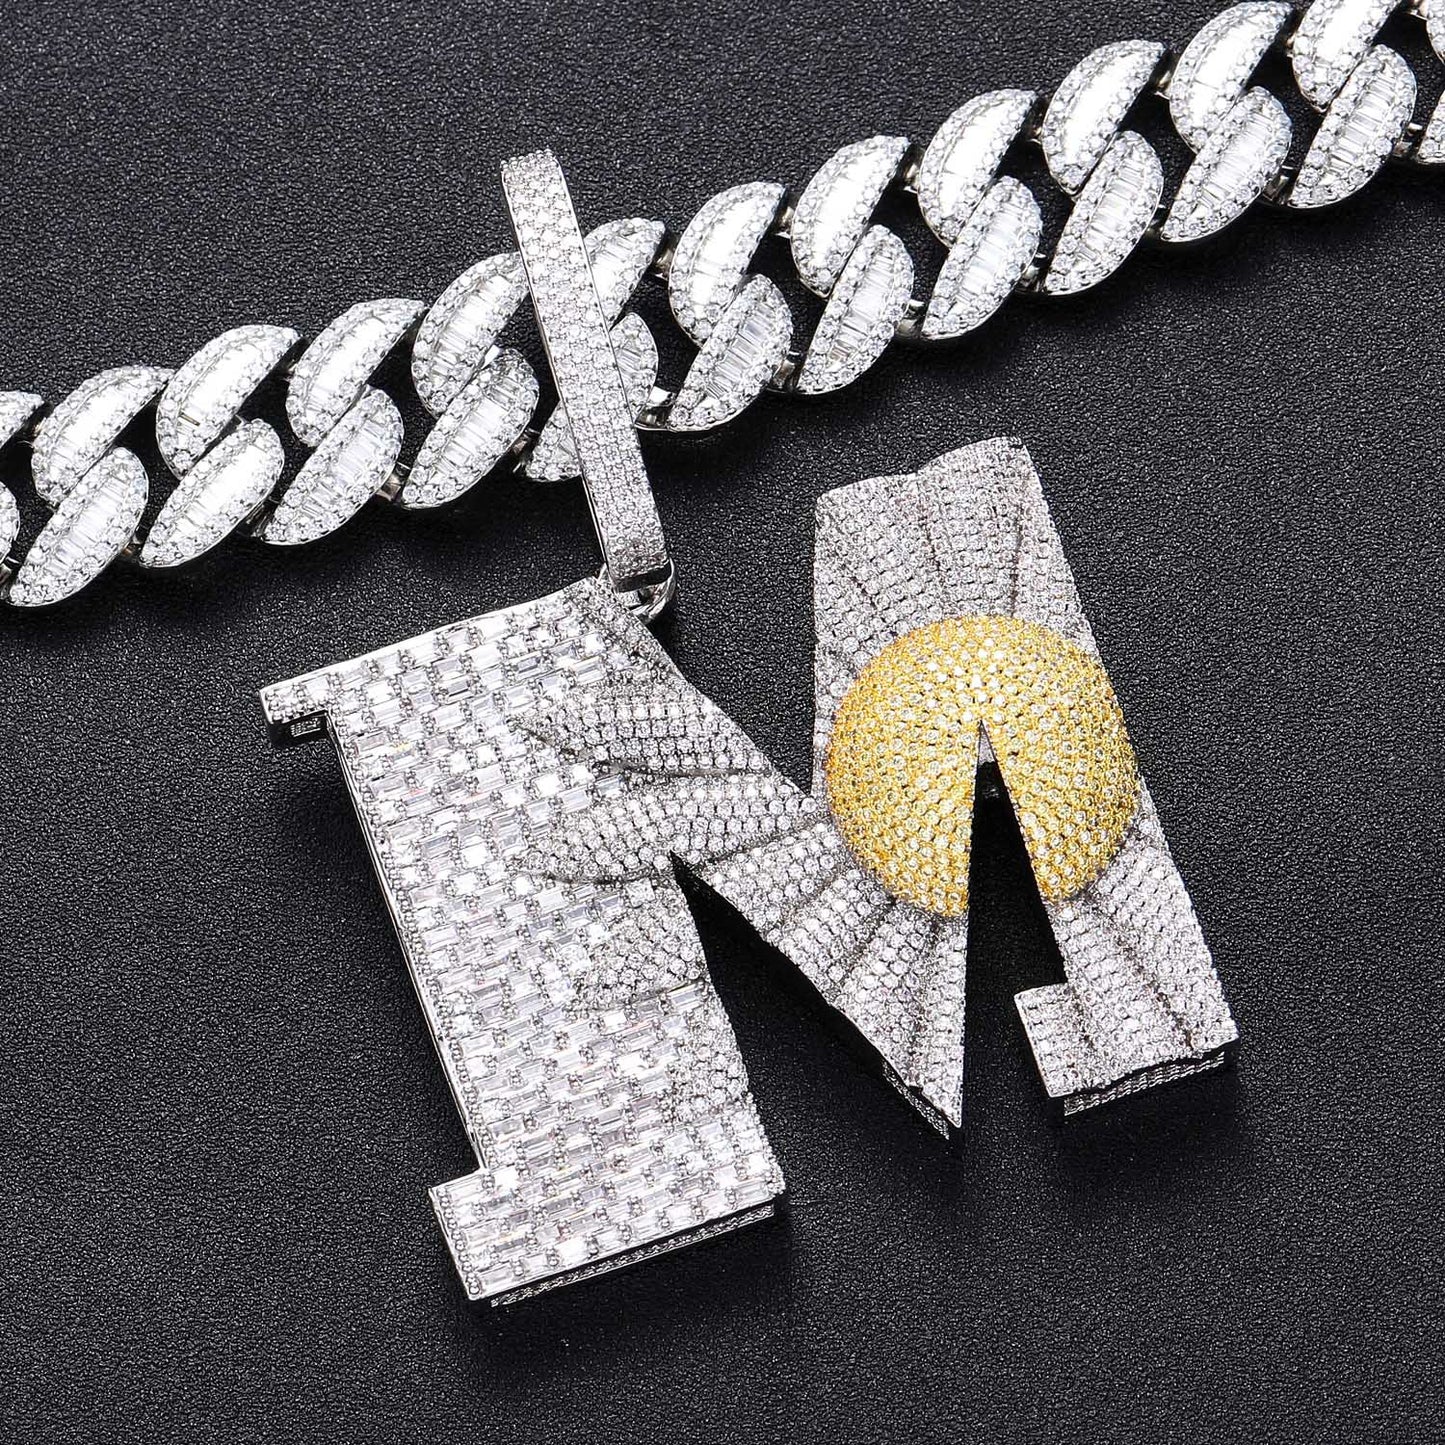 M Little Daisy Hip Hop Necklace Men Pendant T Cubic Zirconia Inlaid Personality Fashion Necklace Jewelry